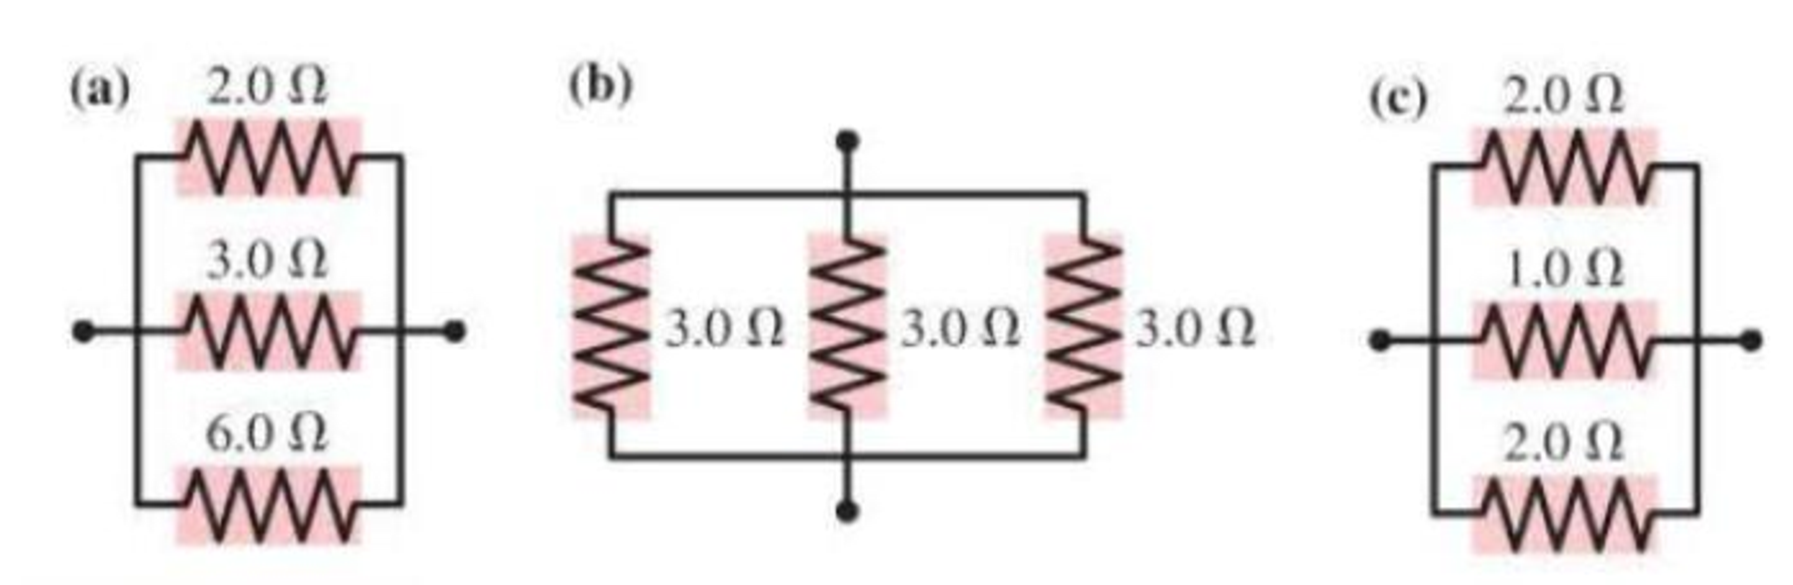 Chapter 23, Problem 11P, What is the equivalent resistance of each group of resistors shown in Figure P23.11? Figure P23.11 